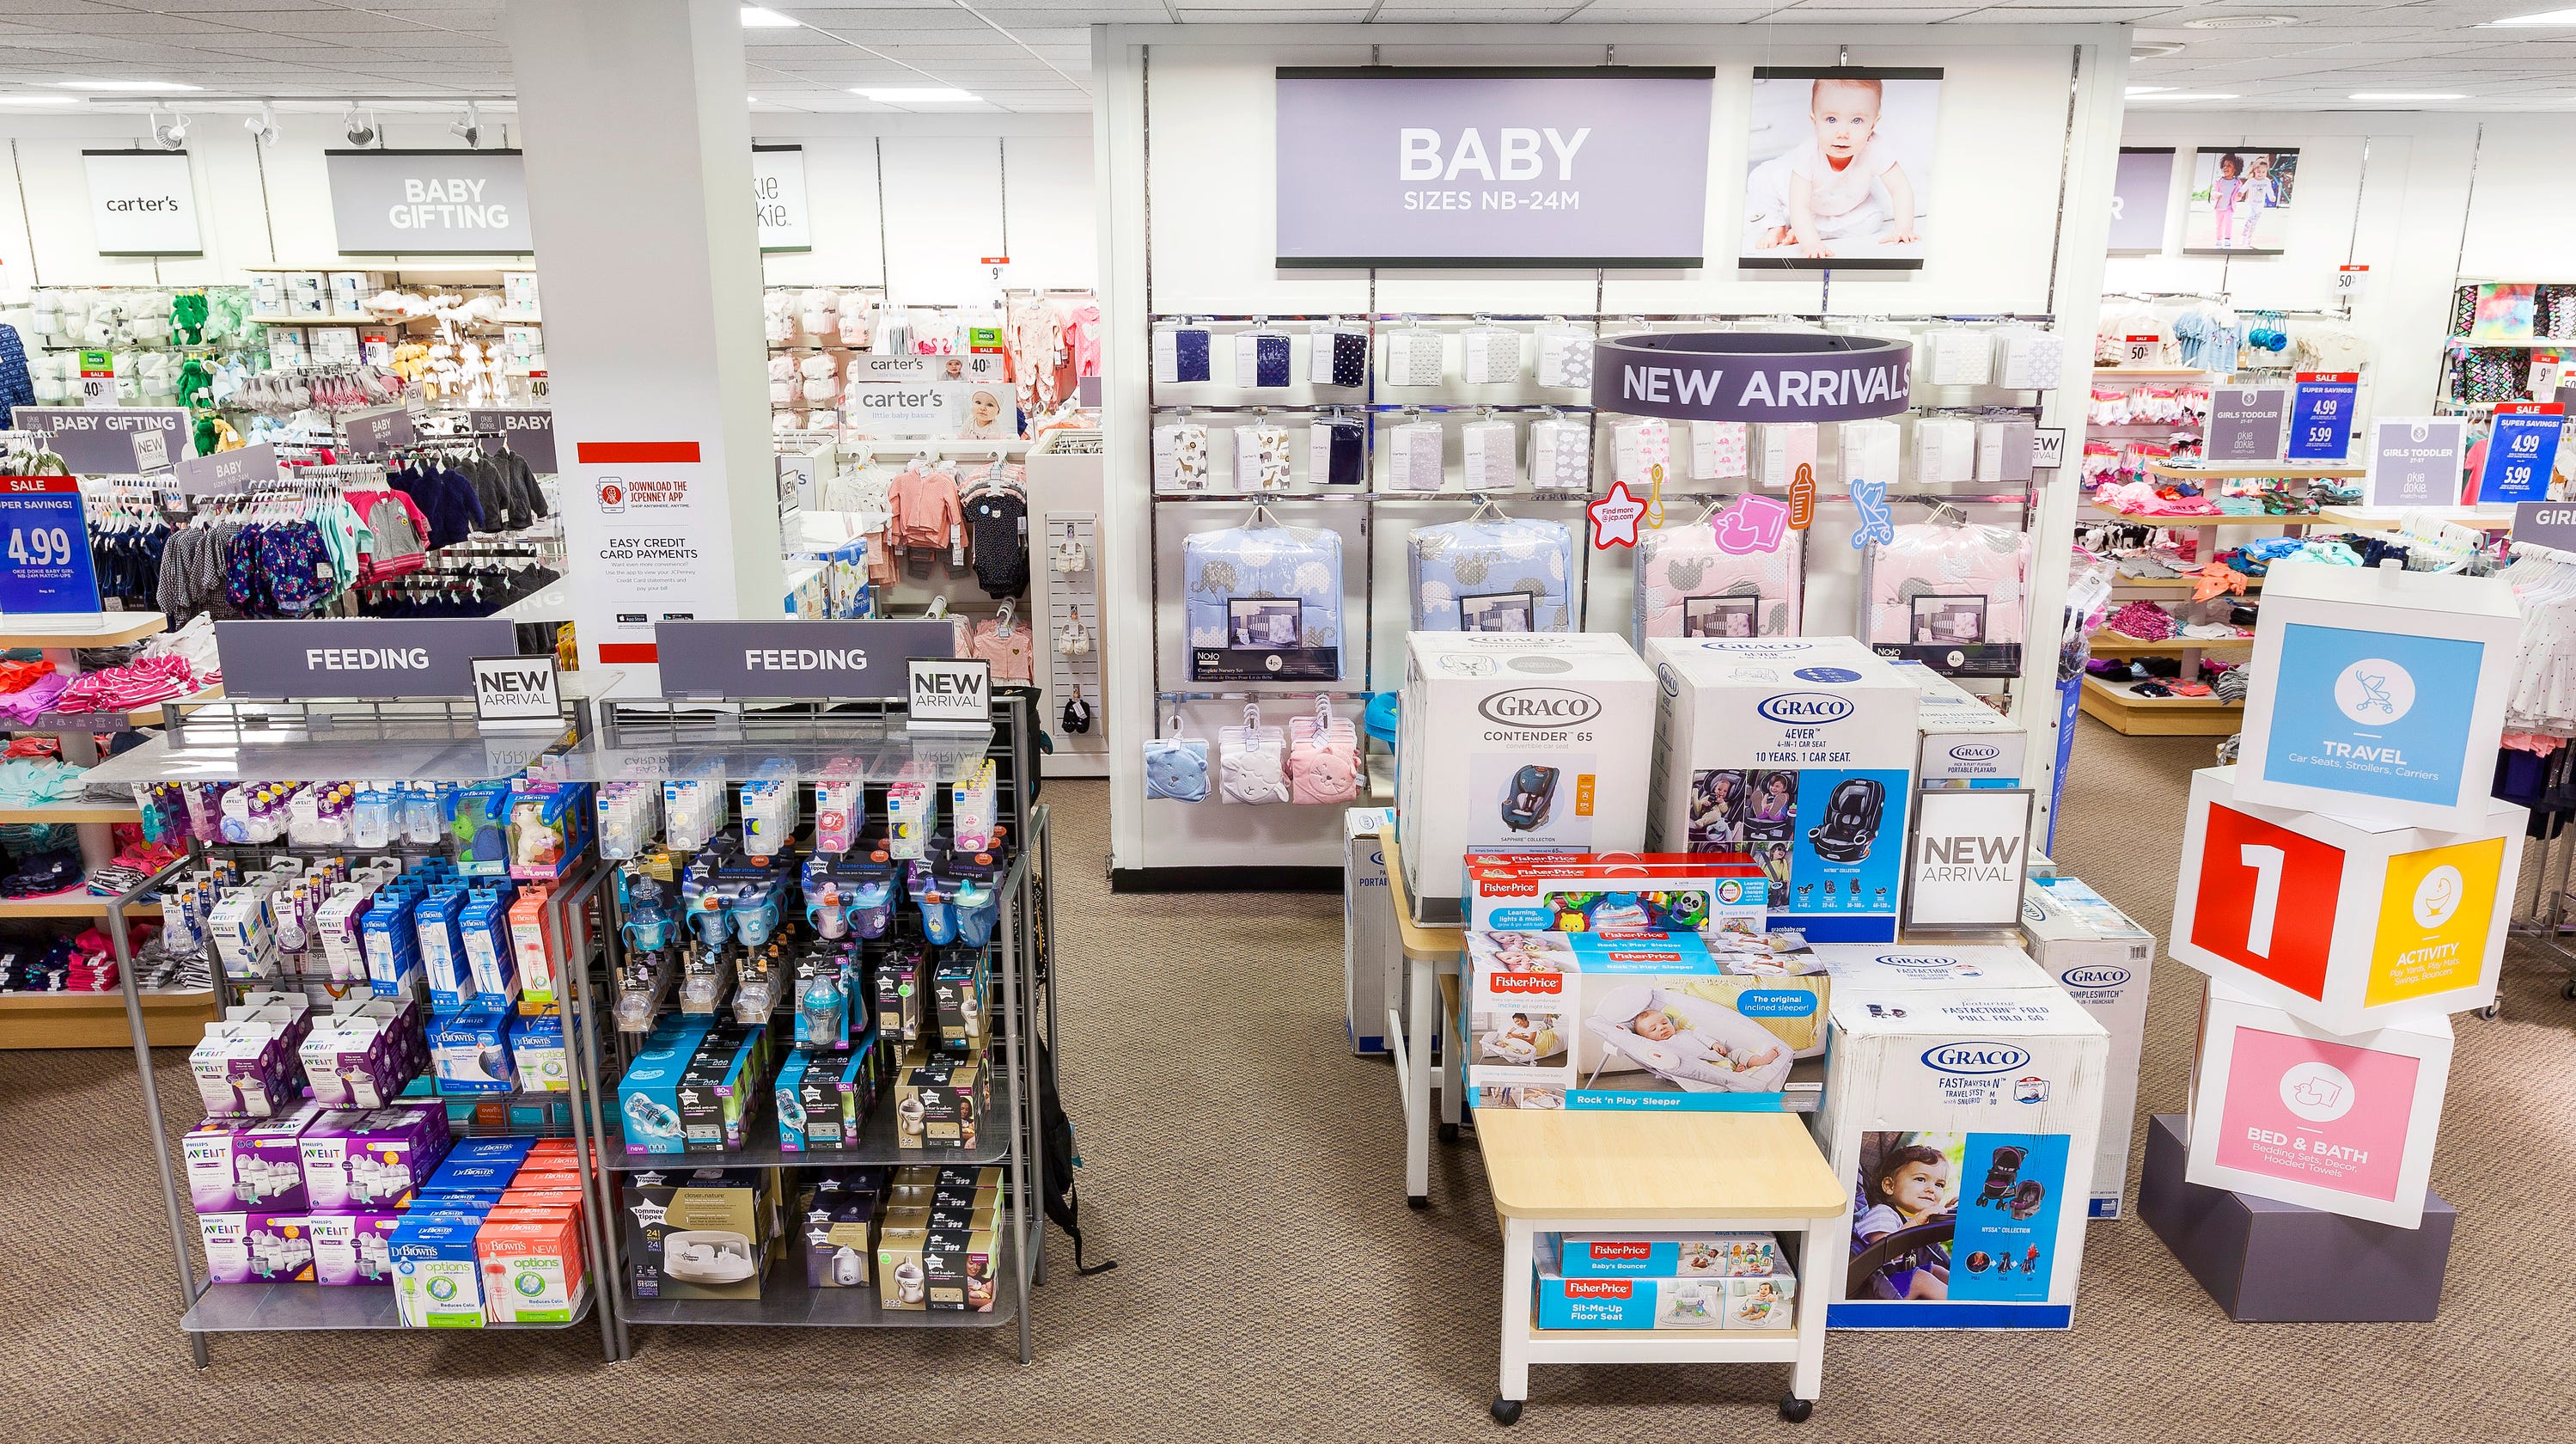 JC Penney to open 500 baby shops amid Babies R Us demise